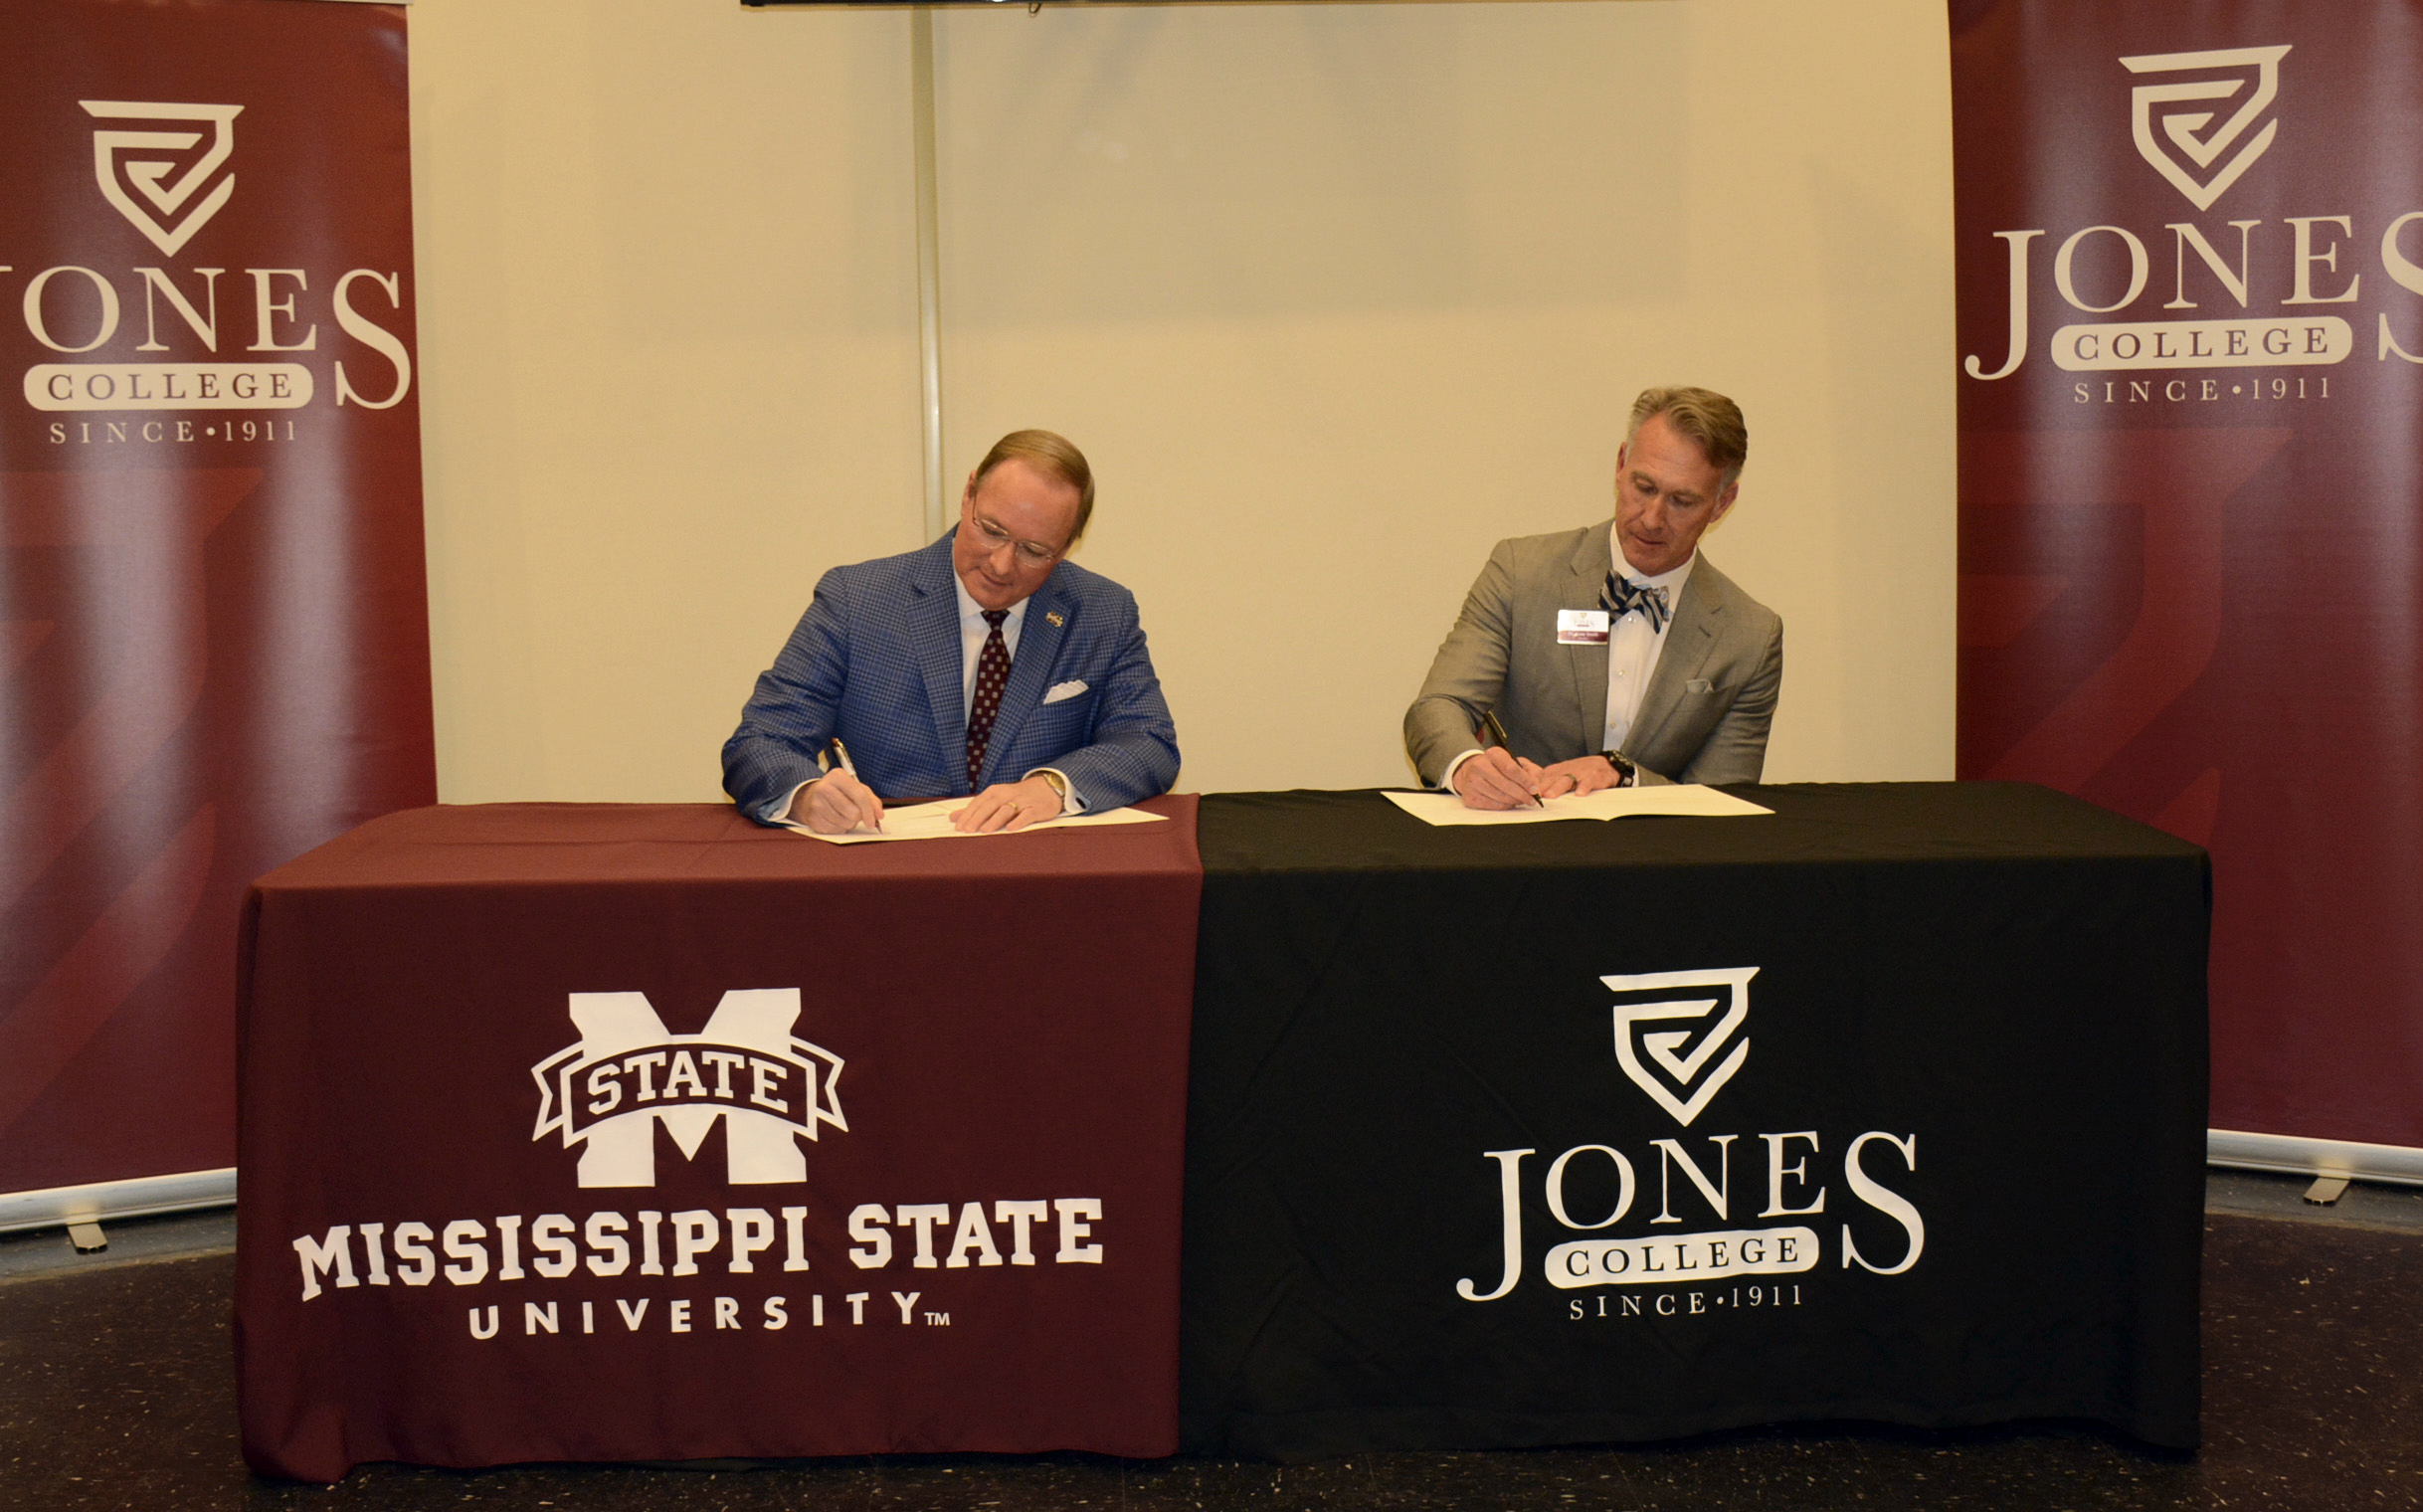 Mississippi State President Mark E. Keenum, left, and Jones College President Jesse Smith sign an agreement Wednesday [Dec. 4] outlining a pathway for Jones College students to complete MSU’s new Bachelor of Applied Science program. (Submitted photo)